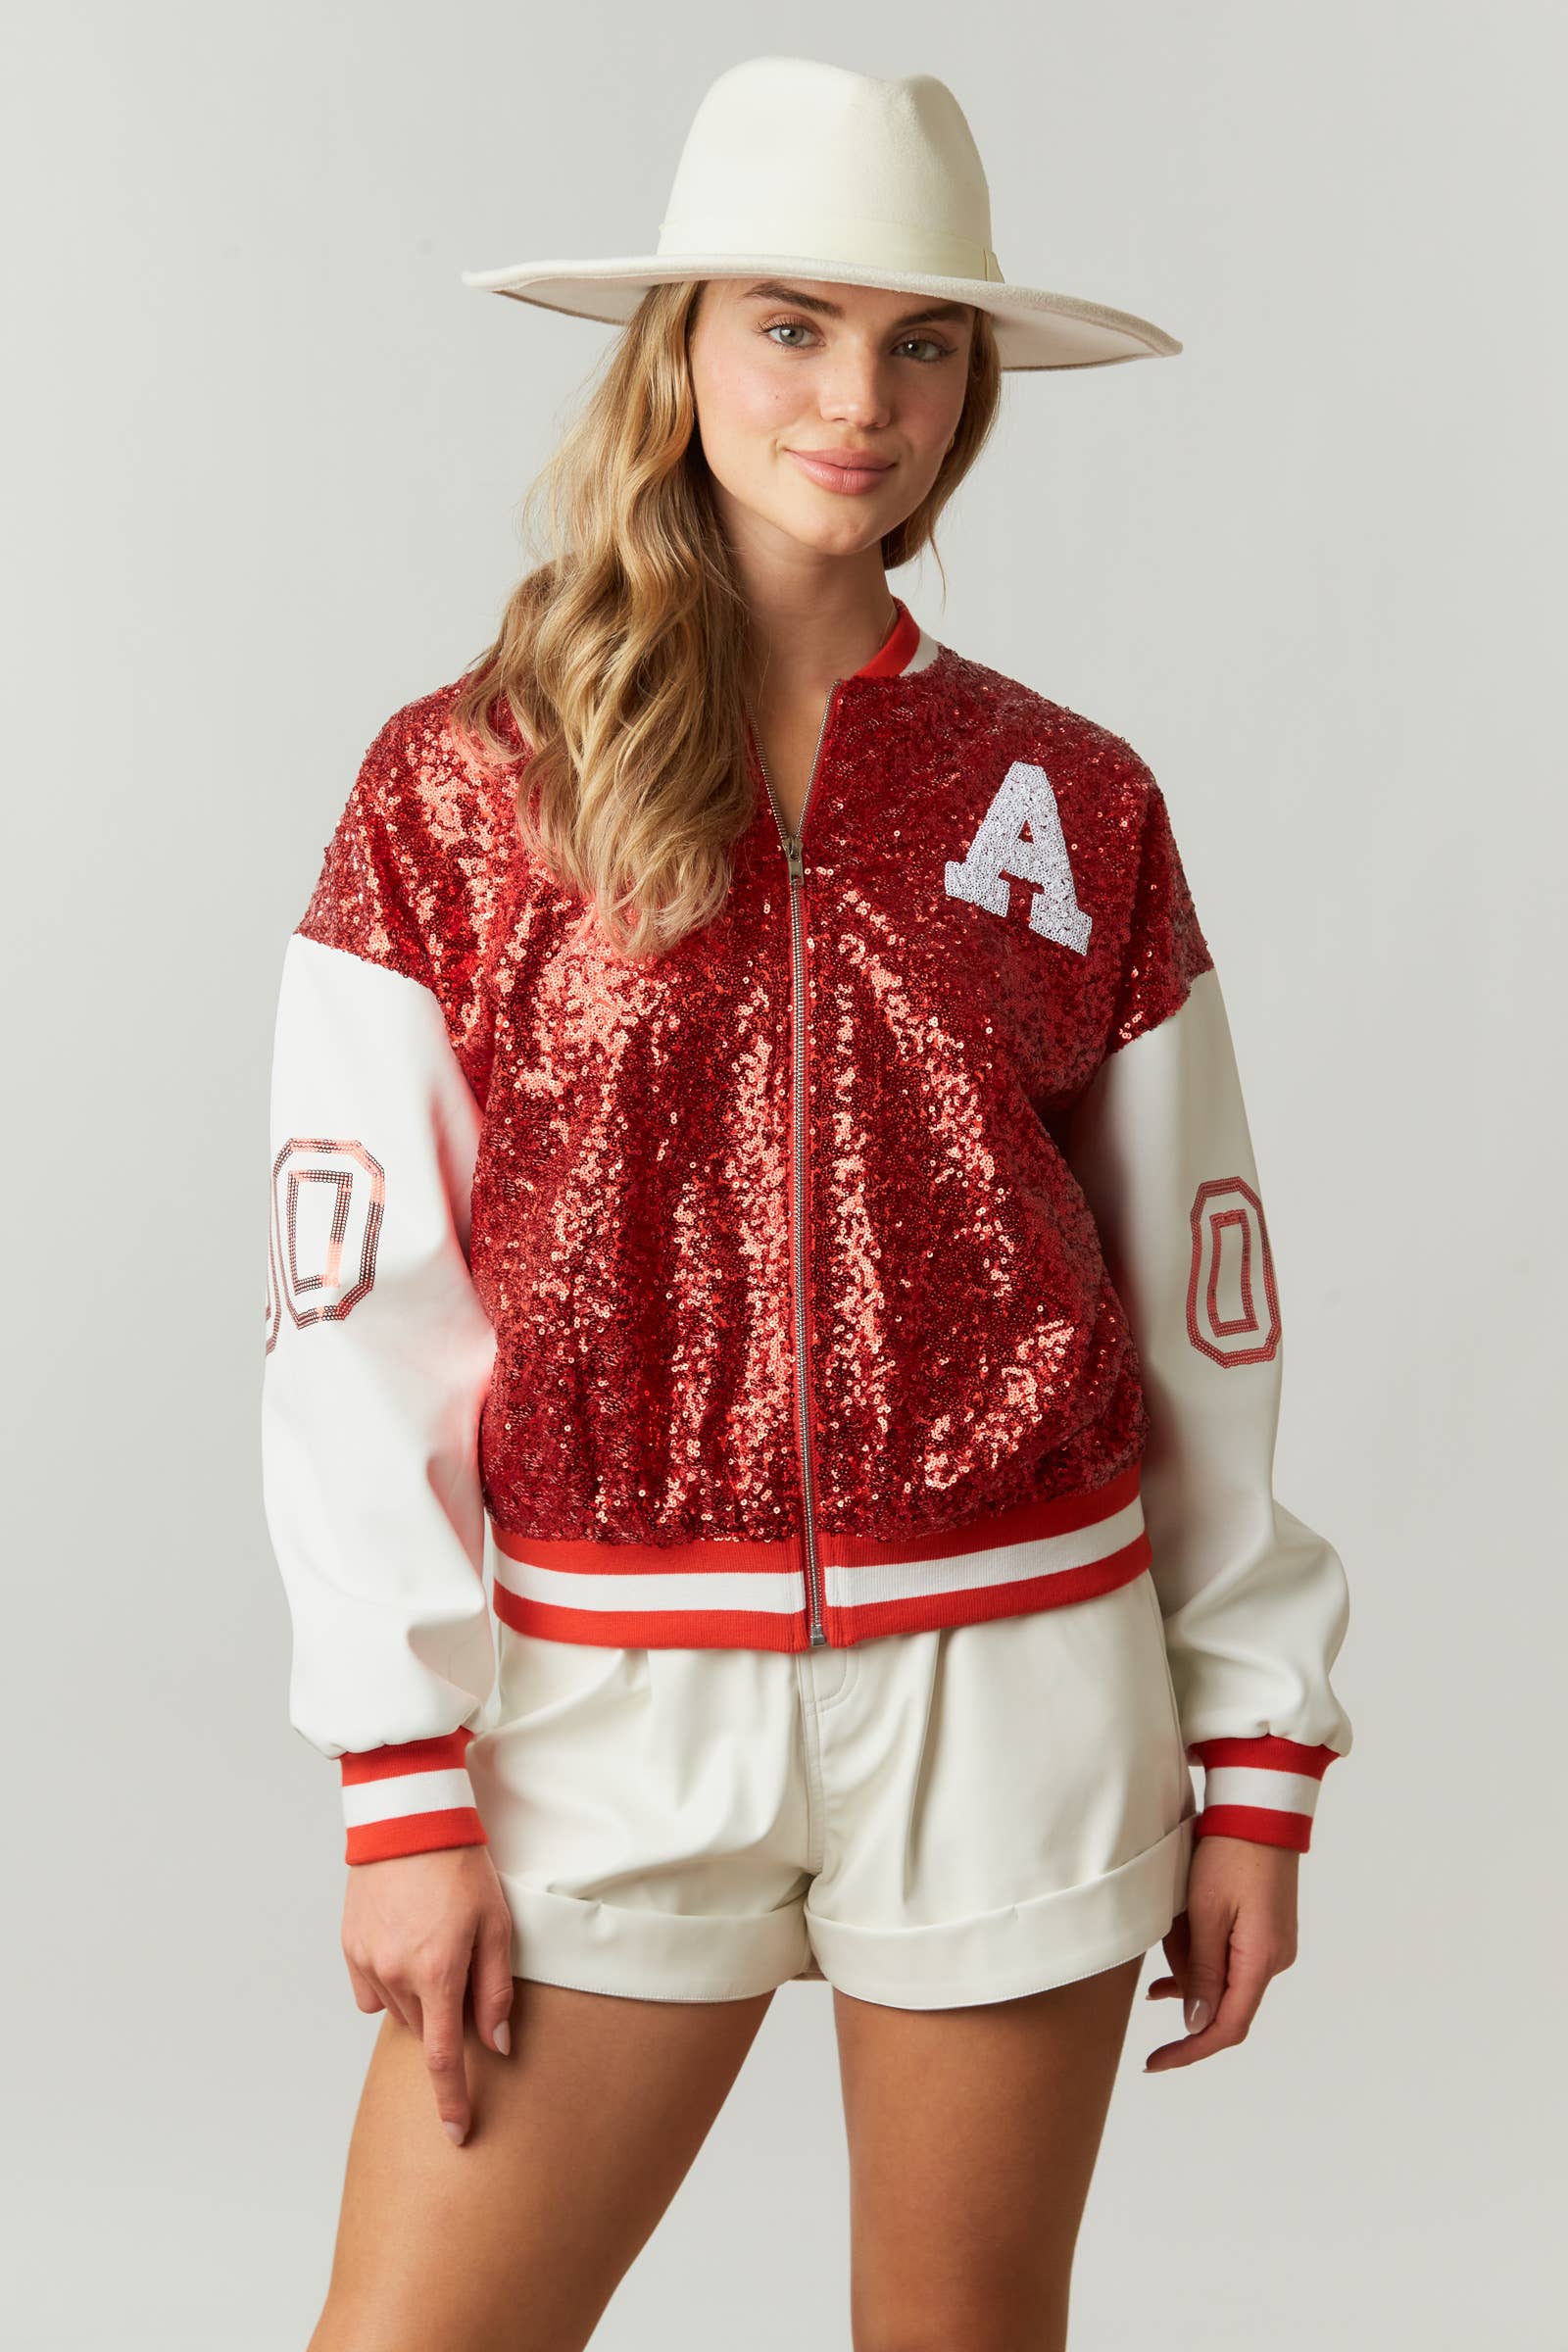 Sequin Baseball Jacket - IFJ63421-01: RED/WHITE / S - Pretty Crafty Lady Shop